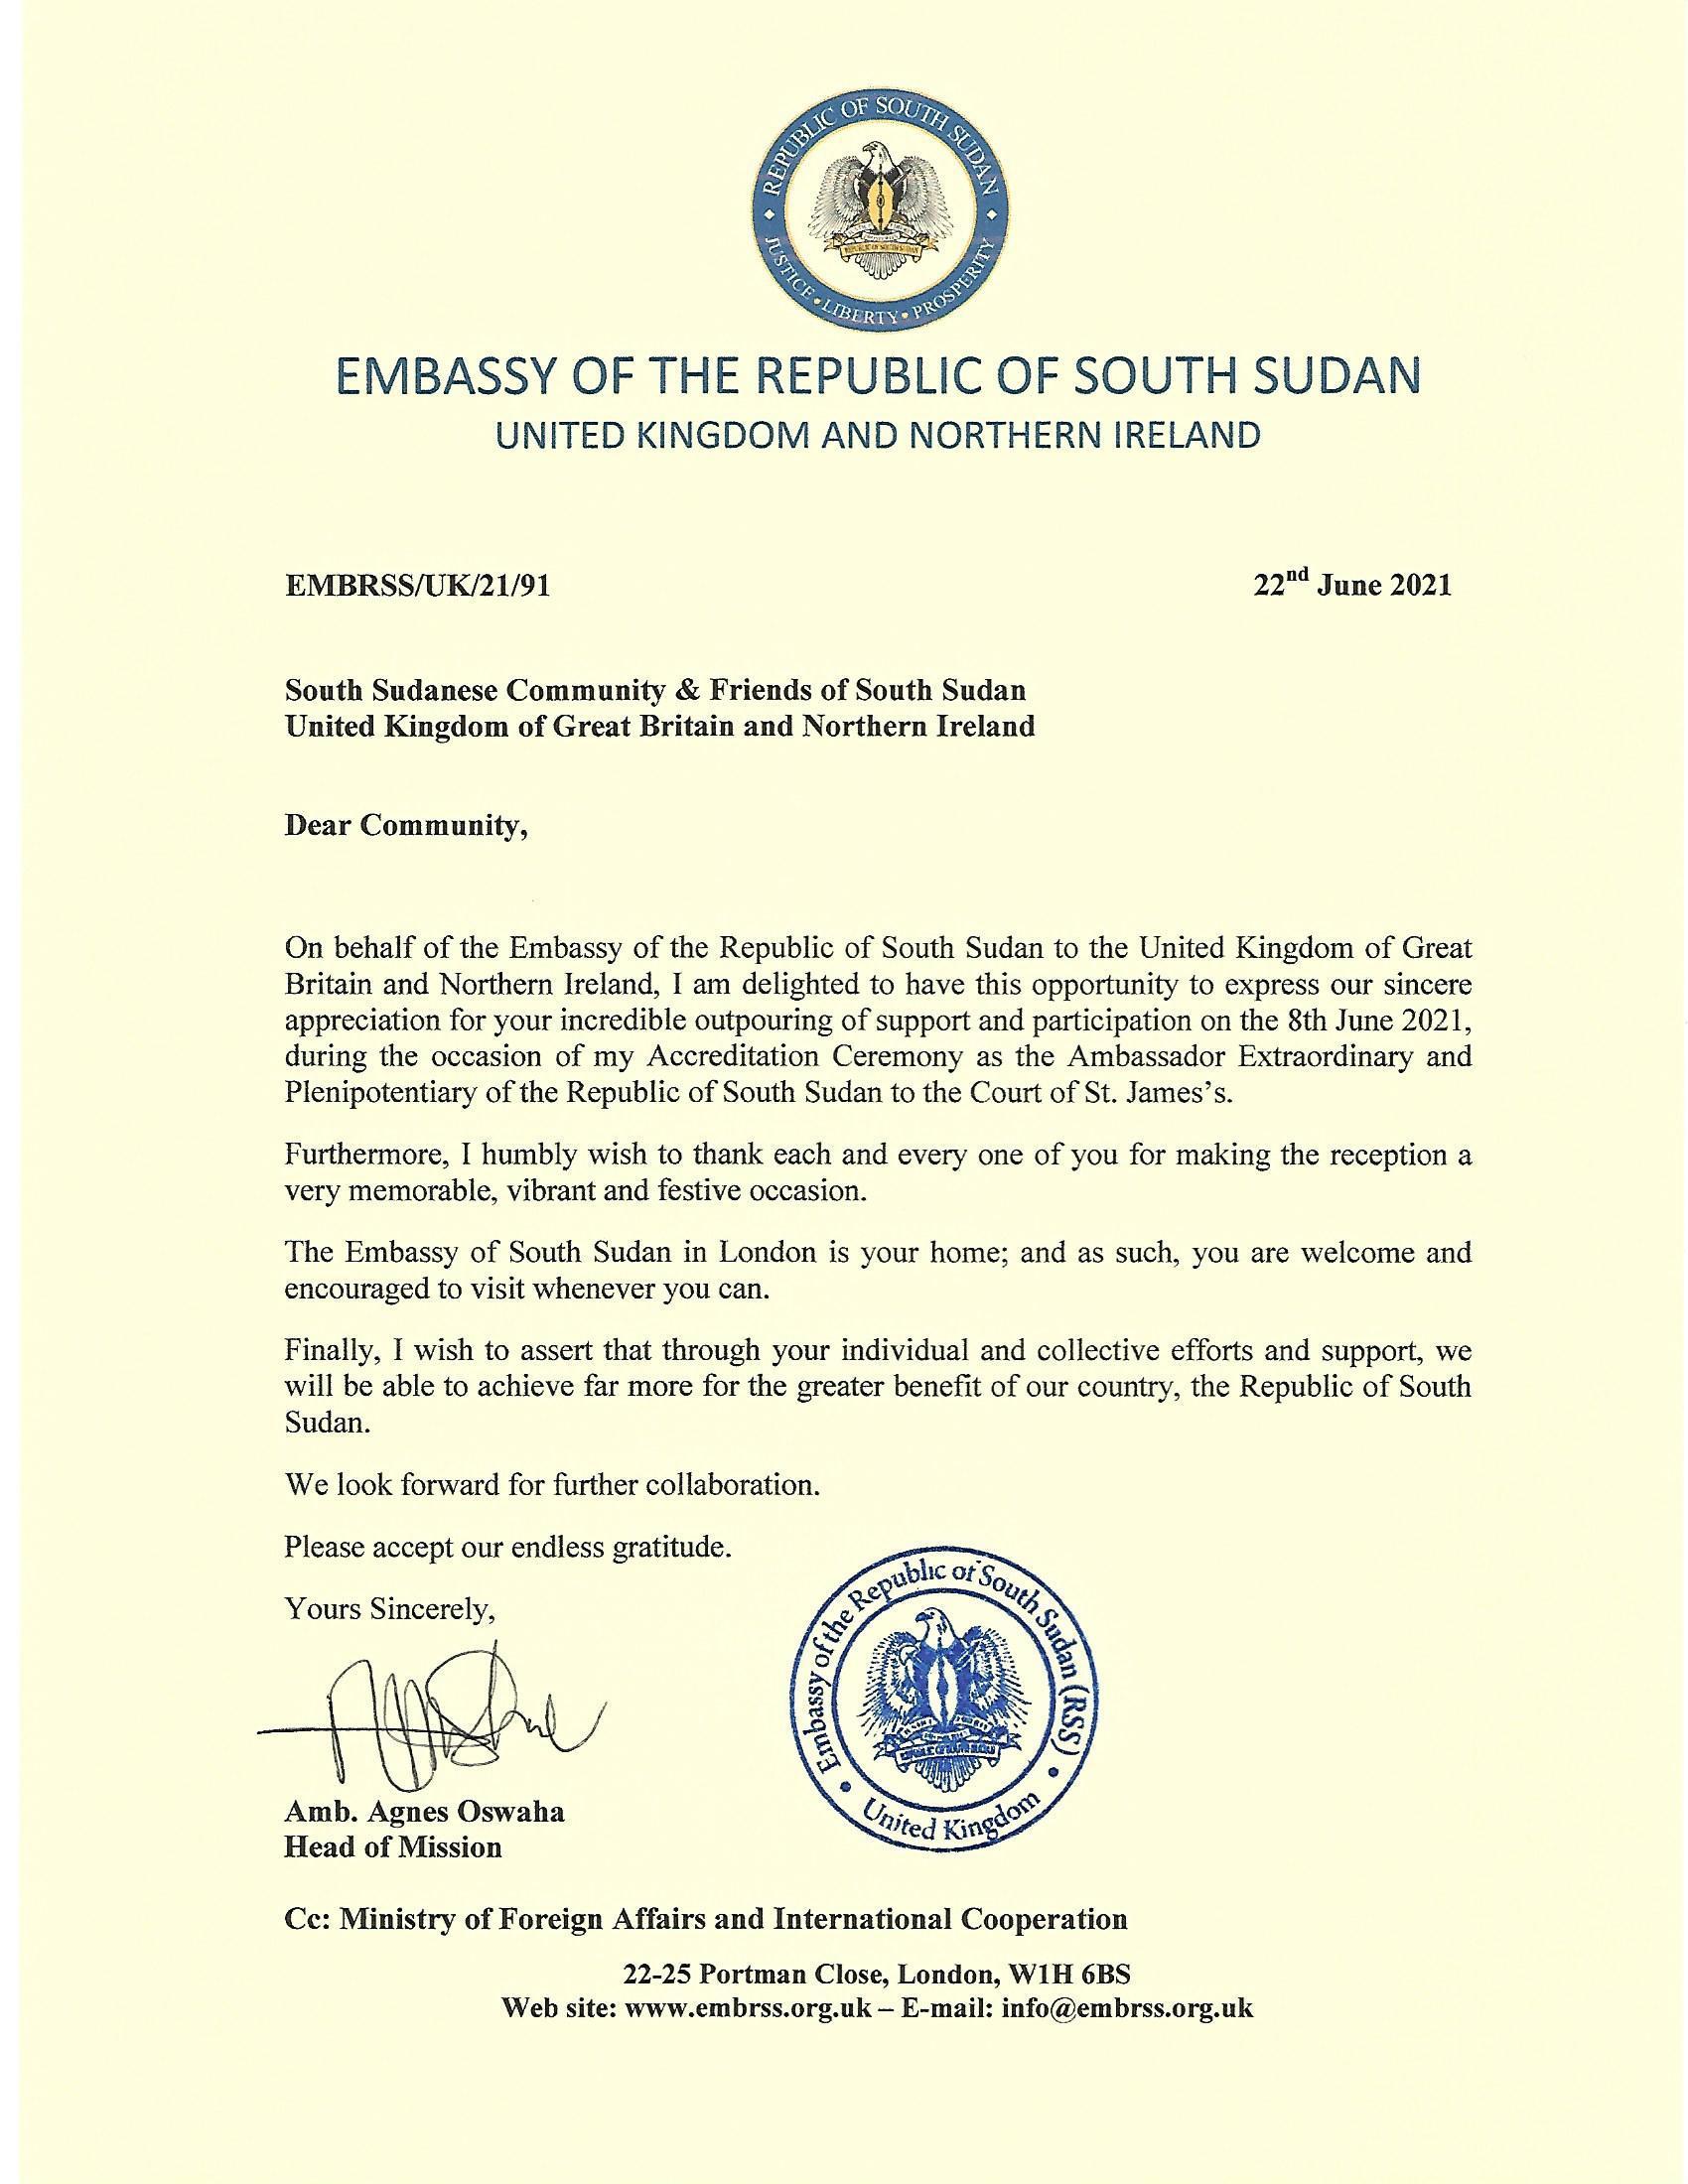 Thank You Note - South Sudanese in the UK and Northern Ireland